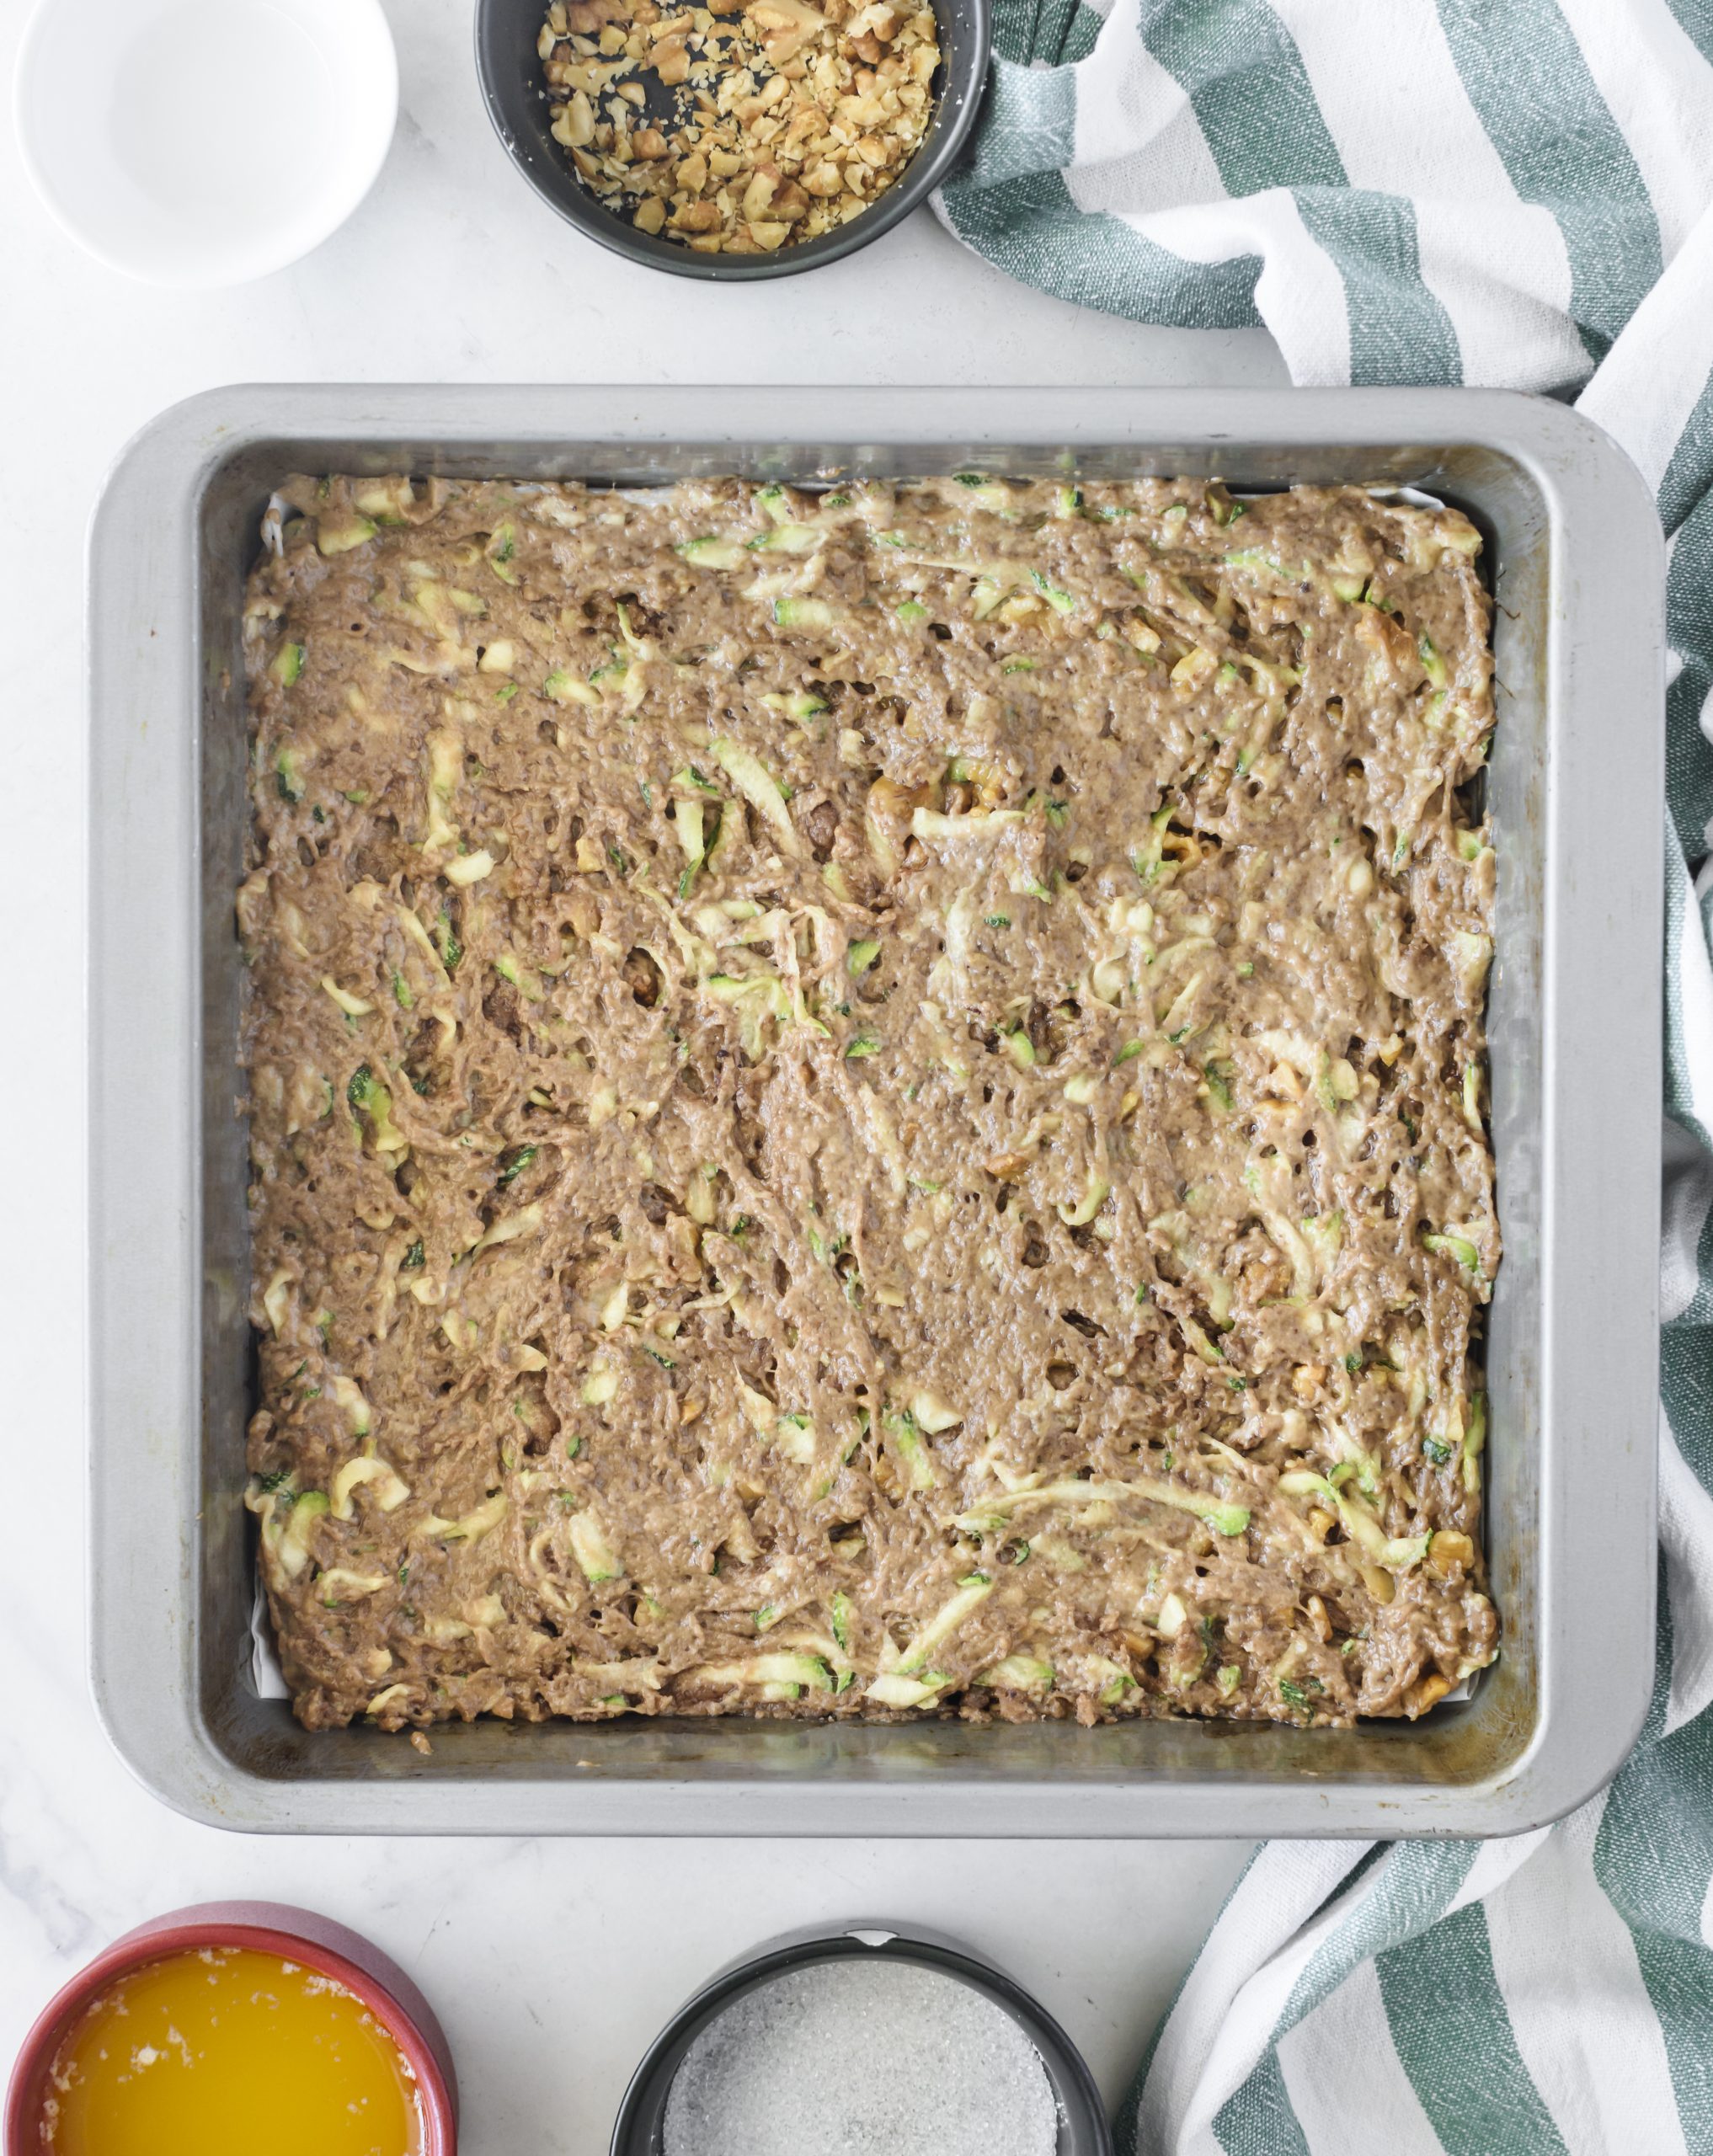 Spread the mixture into a well-greased 9x13 baking dish. 